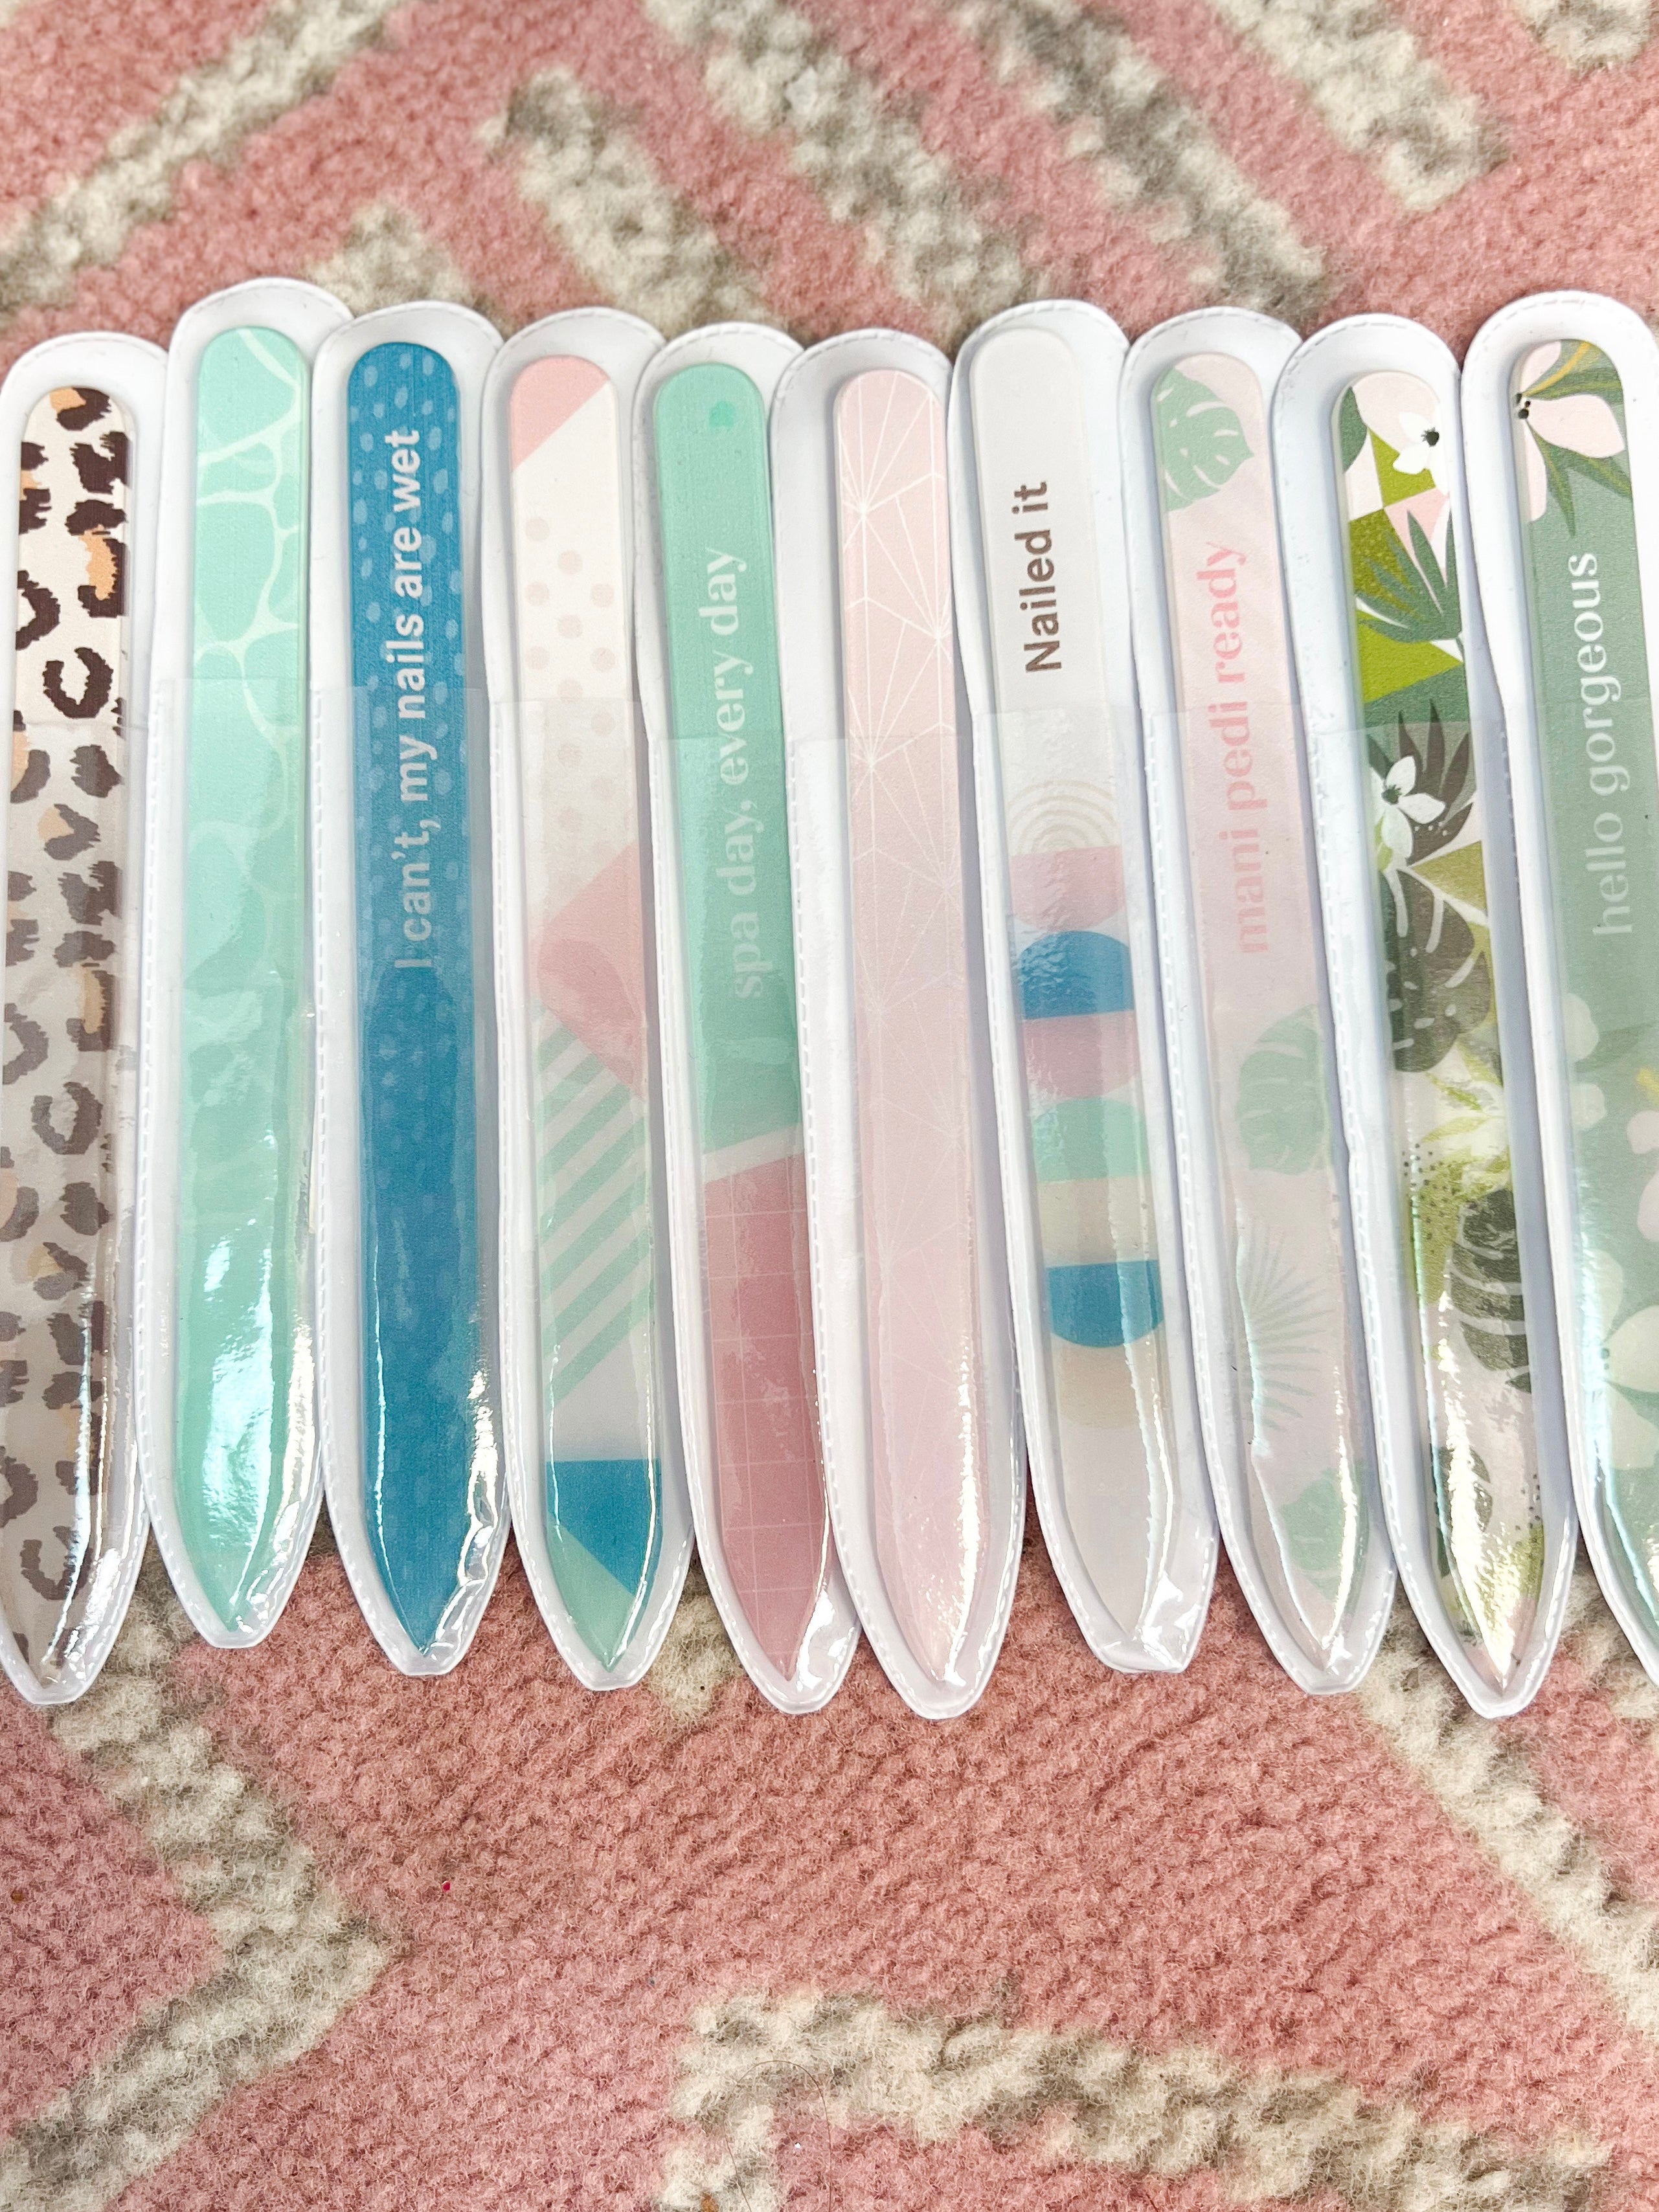 Better Shape Up Glass Nail File-340 Beauty/Self Care-The Lovely Closet-The Lovely Closet, Women's Fashion Boutique in Alexandria, KY